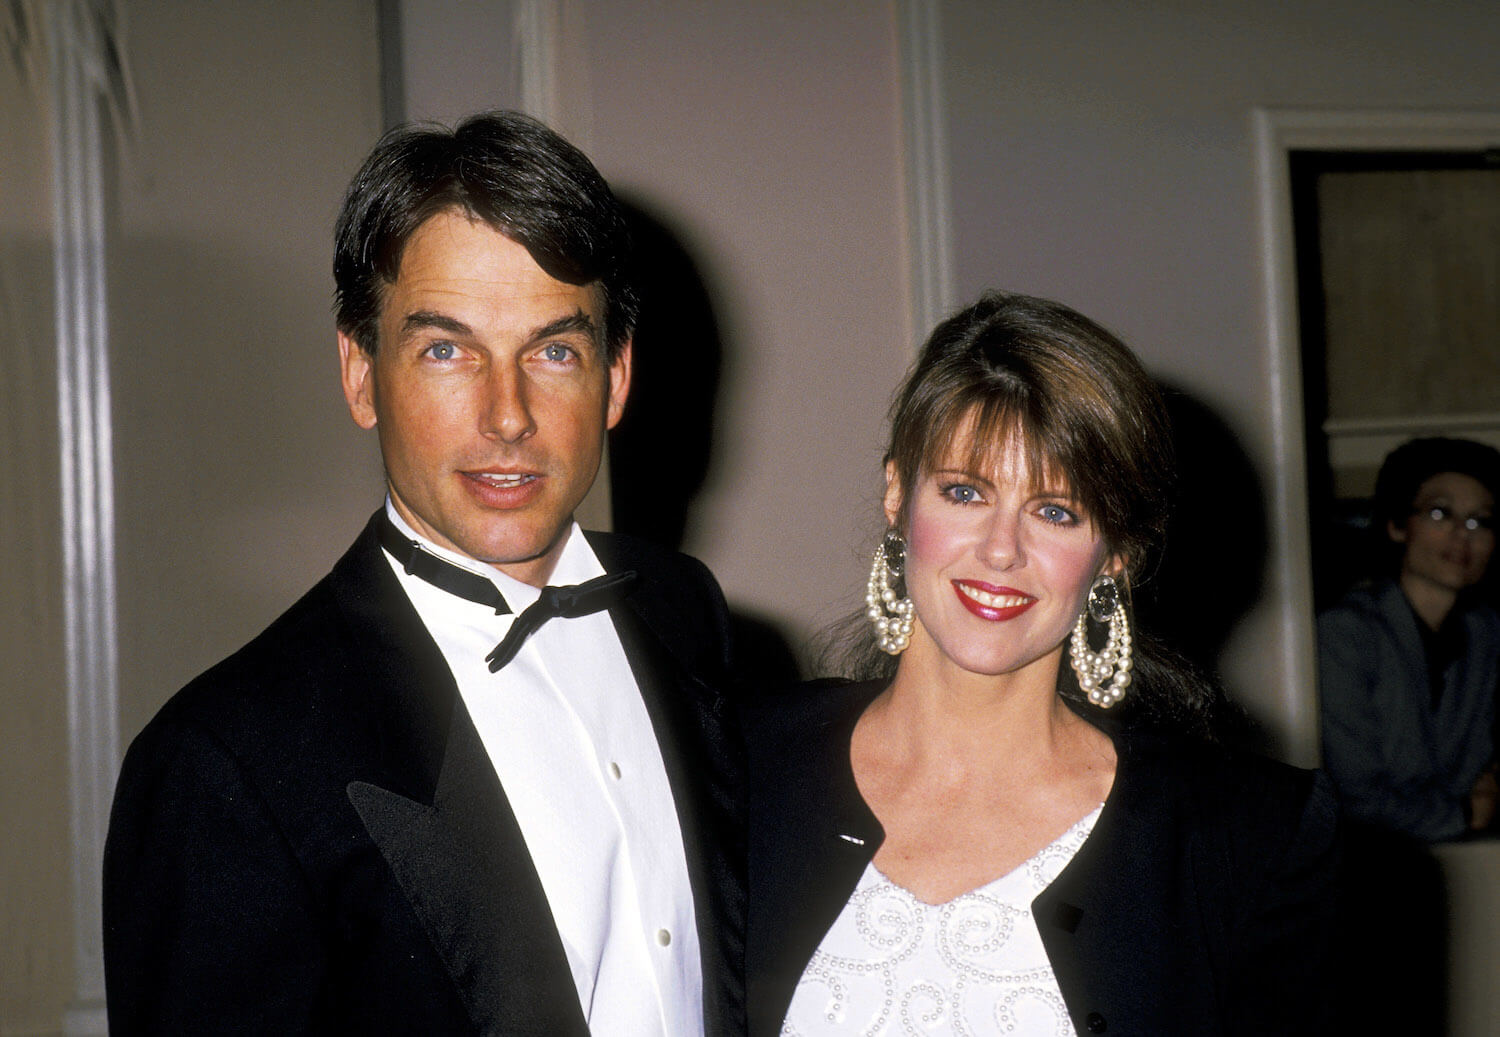 'NCIS' star Mark Harmon wearing a suit next to his wife, Pam Dawber